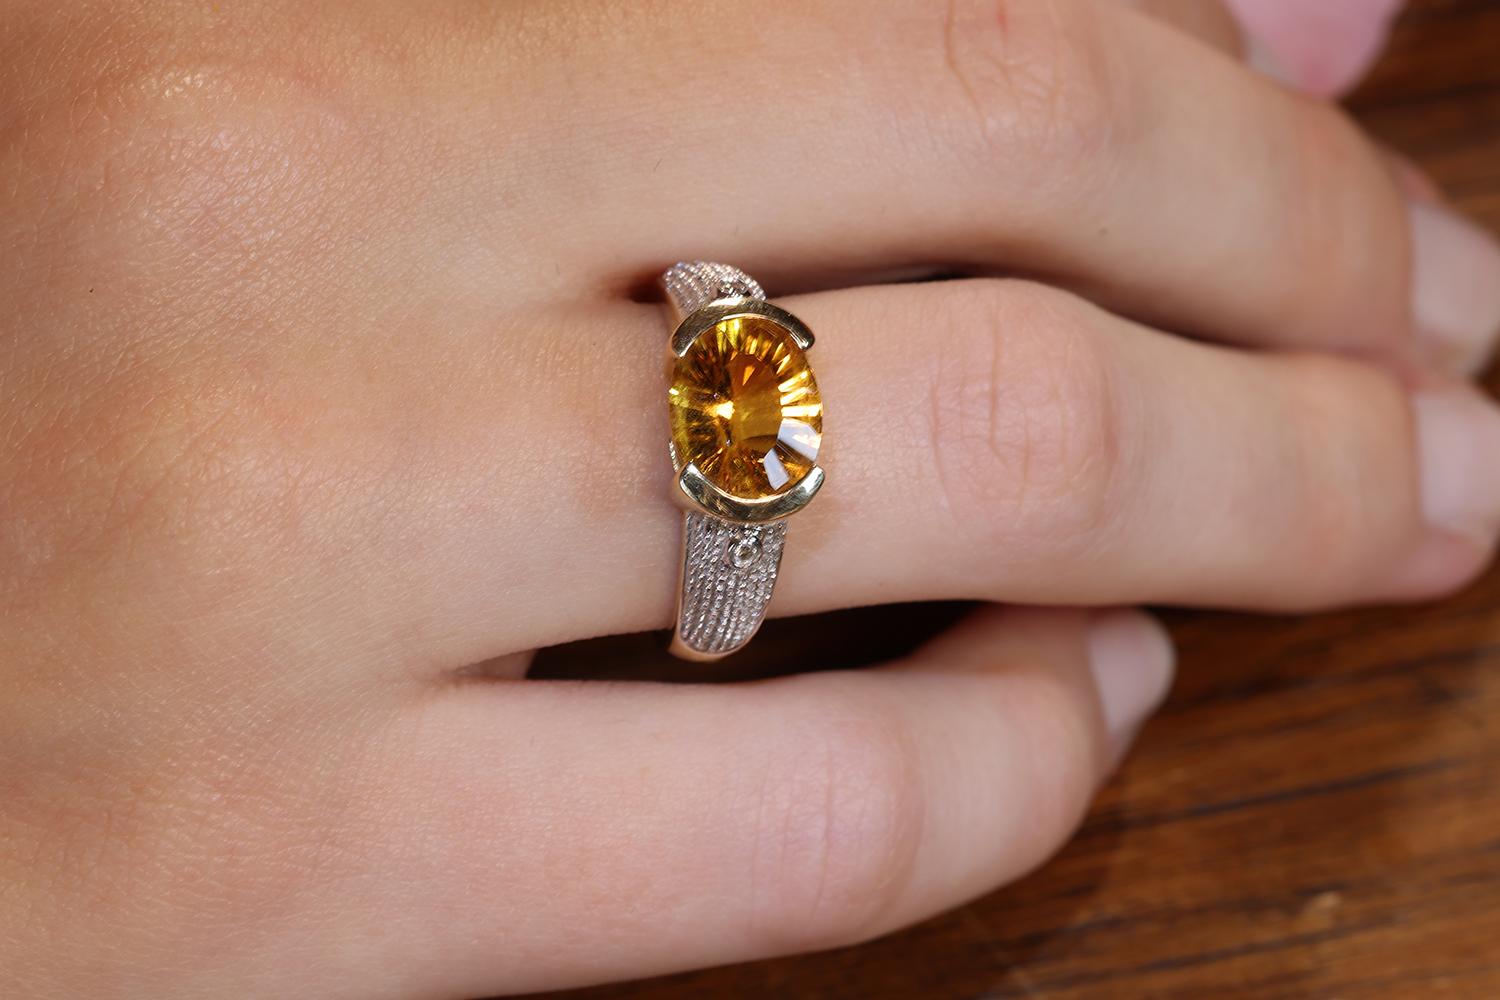 LeVian Orange Citrine Ring, Accented Diamond Shank, 14K Yellow and White Gold For Sale 2